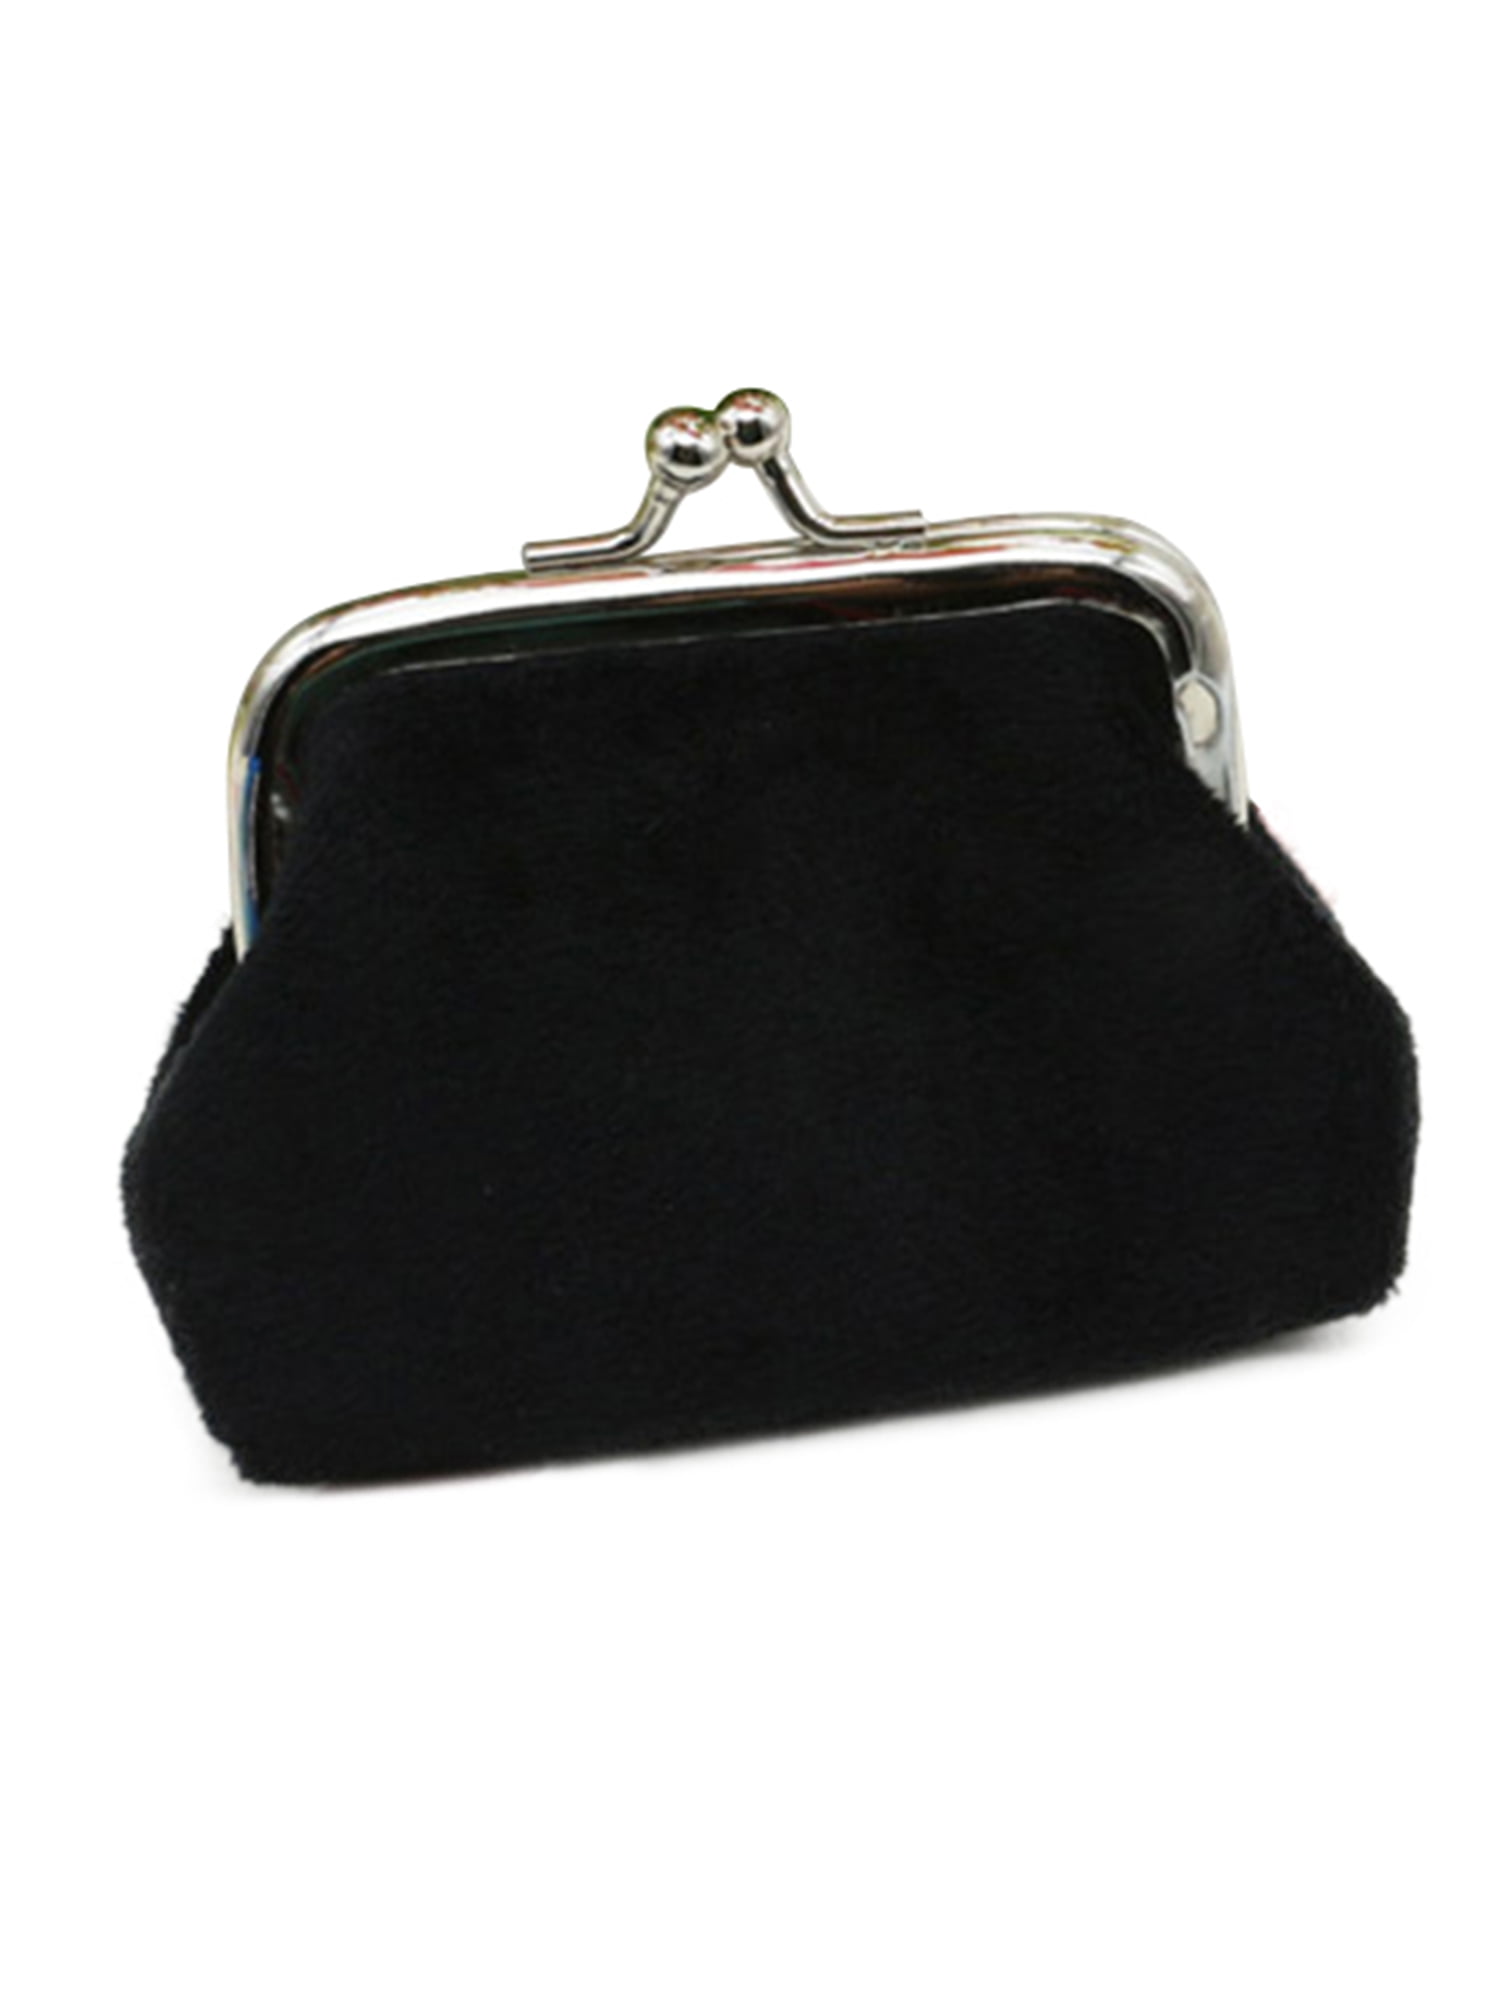 Ladies Clip Twist Top Soft Leather Coin Card Pocket Sized Purse Black Tan Red